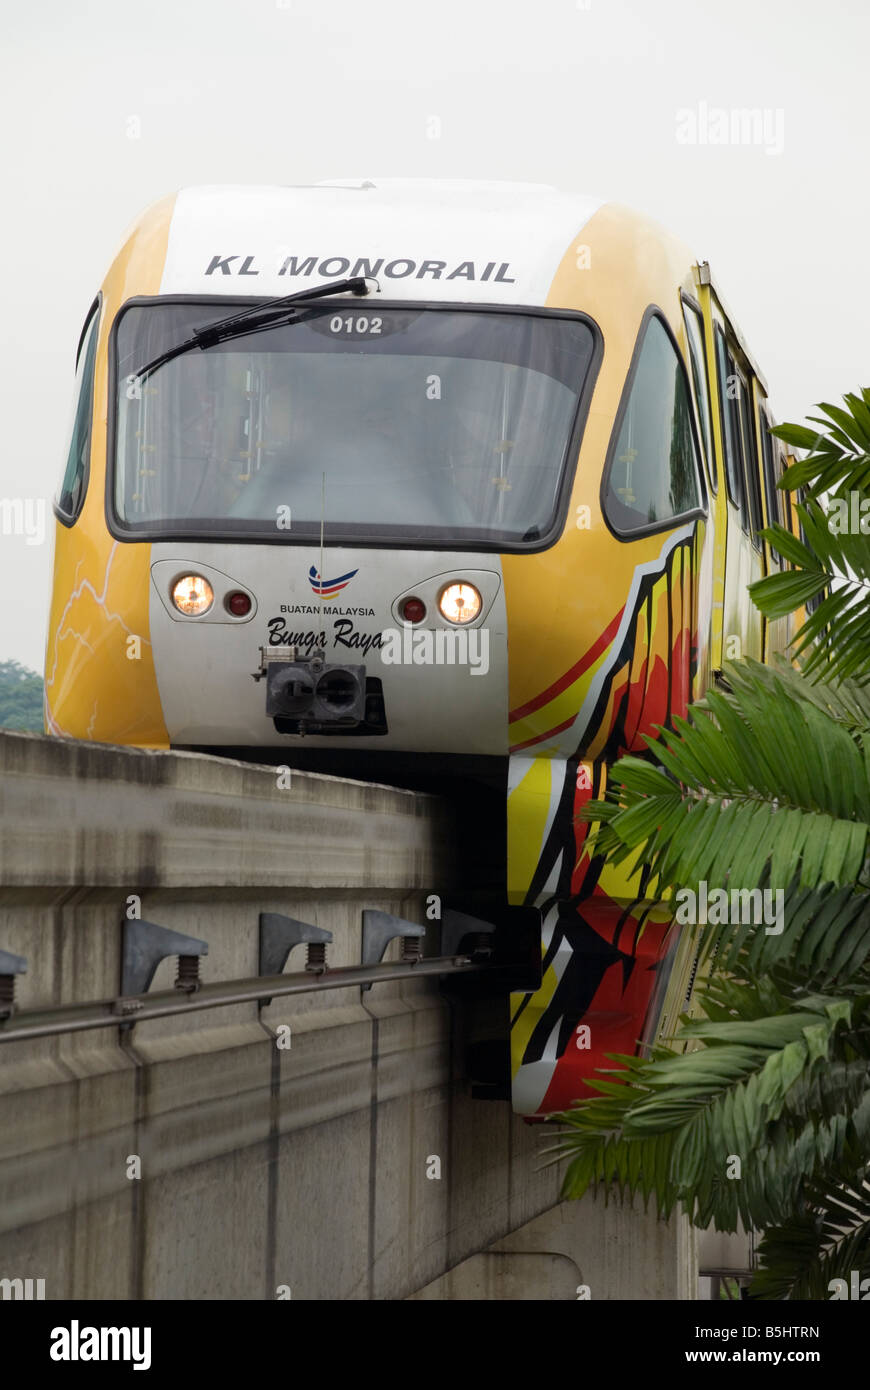 A train approaches a station on the raised KL Monorail public transport network, Malaysia Stock Photo